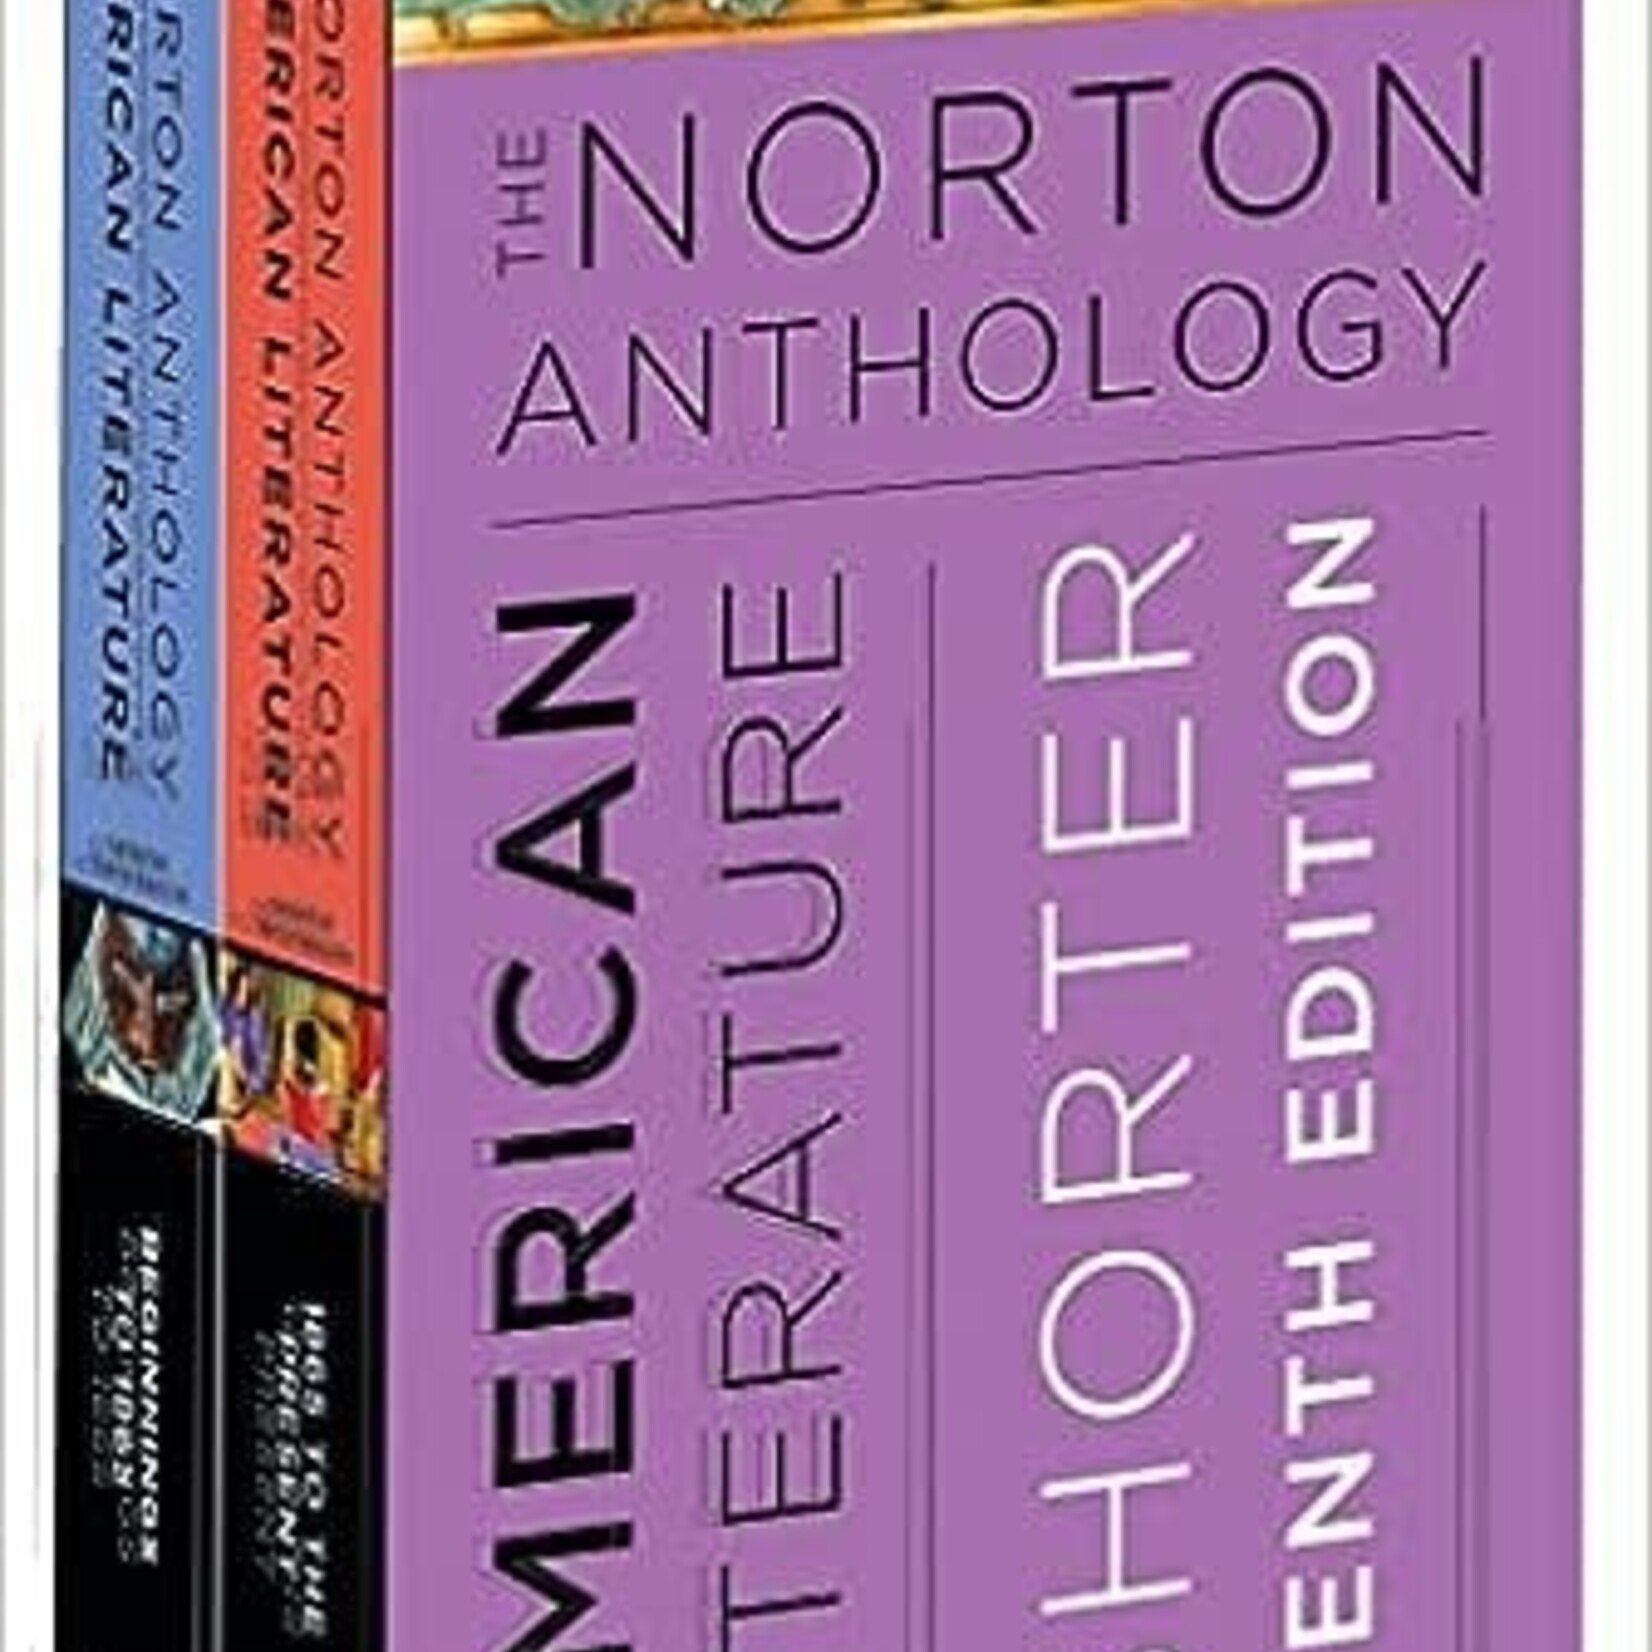 NORTON ANTHOLOGY OF AMERICAN LITERATURE, 10TH EDITION